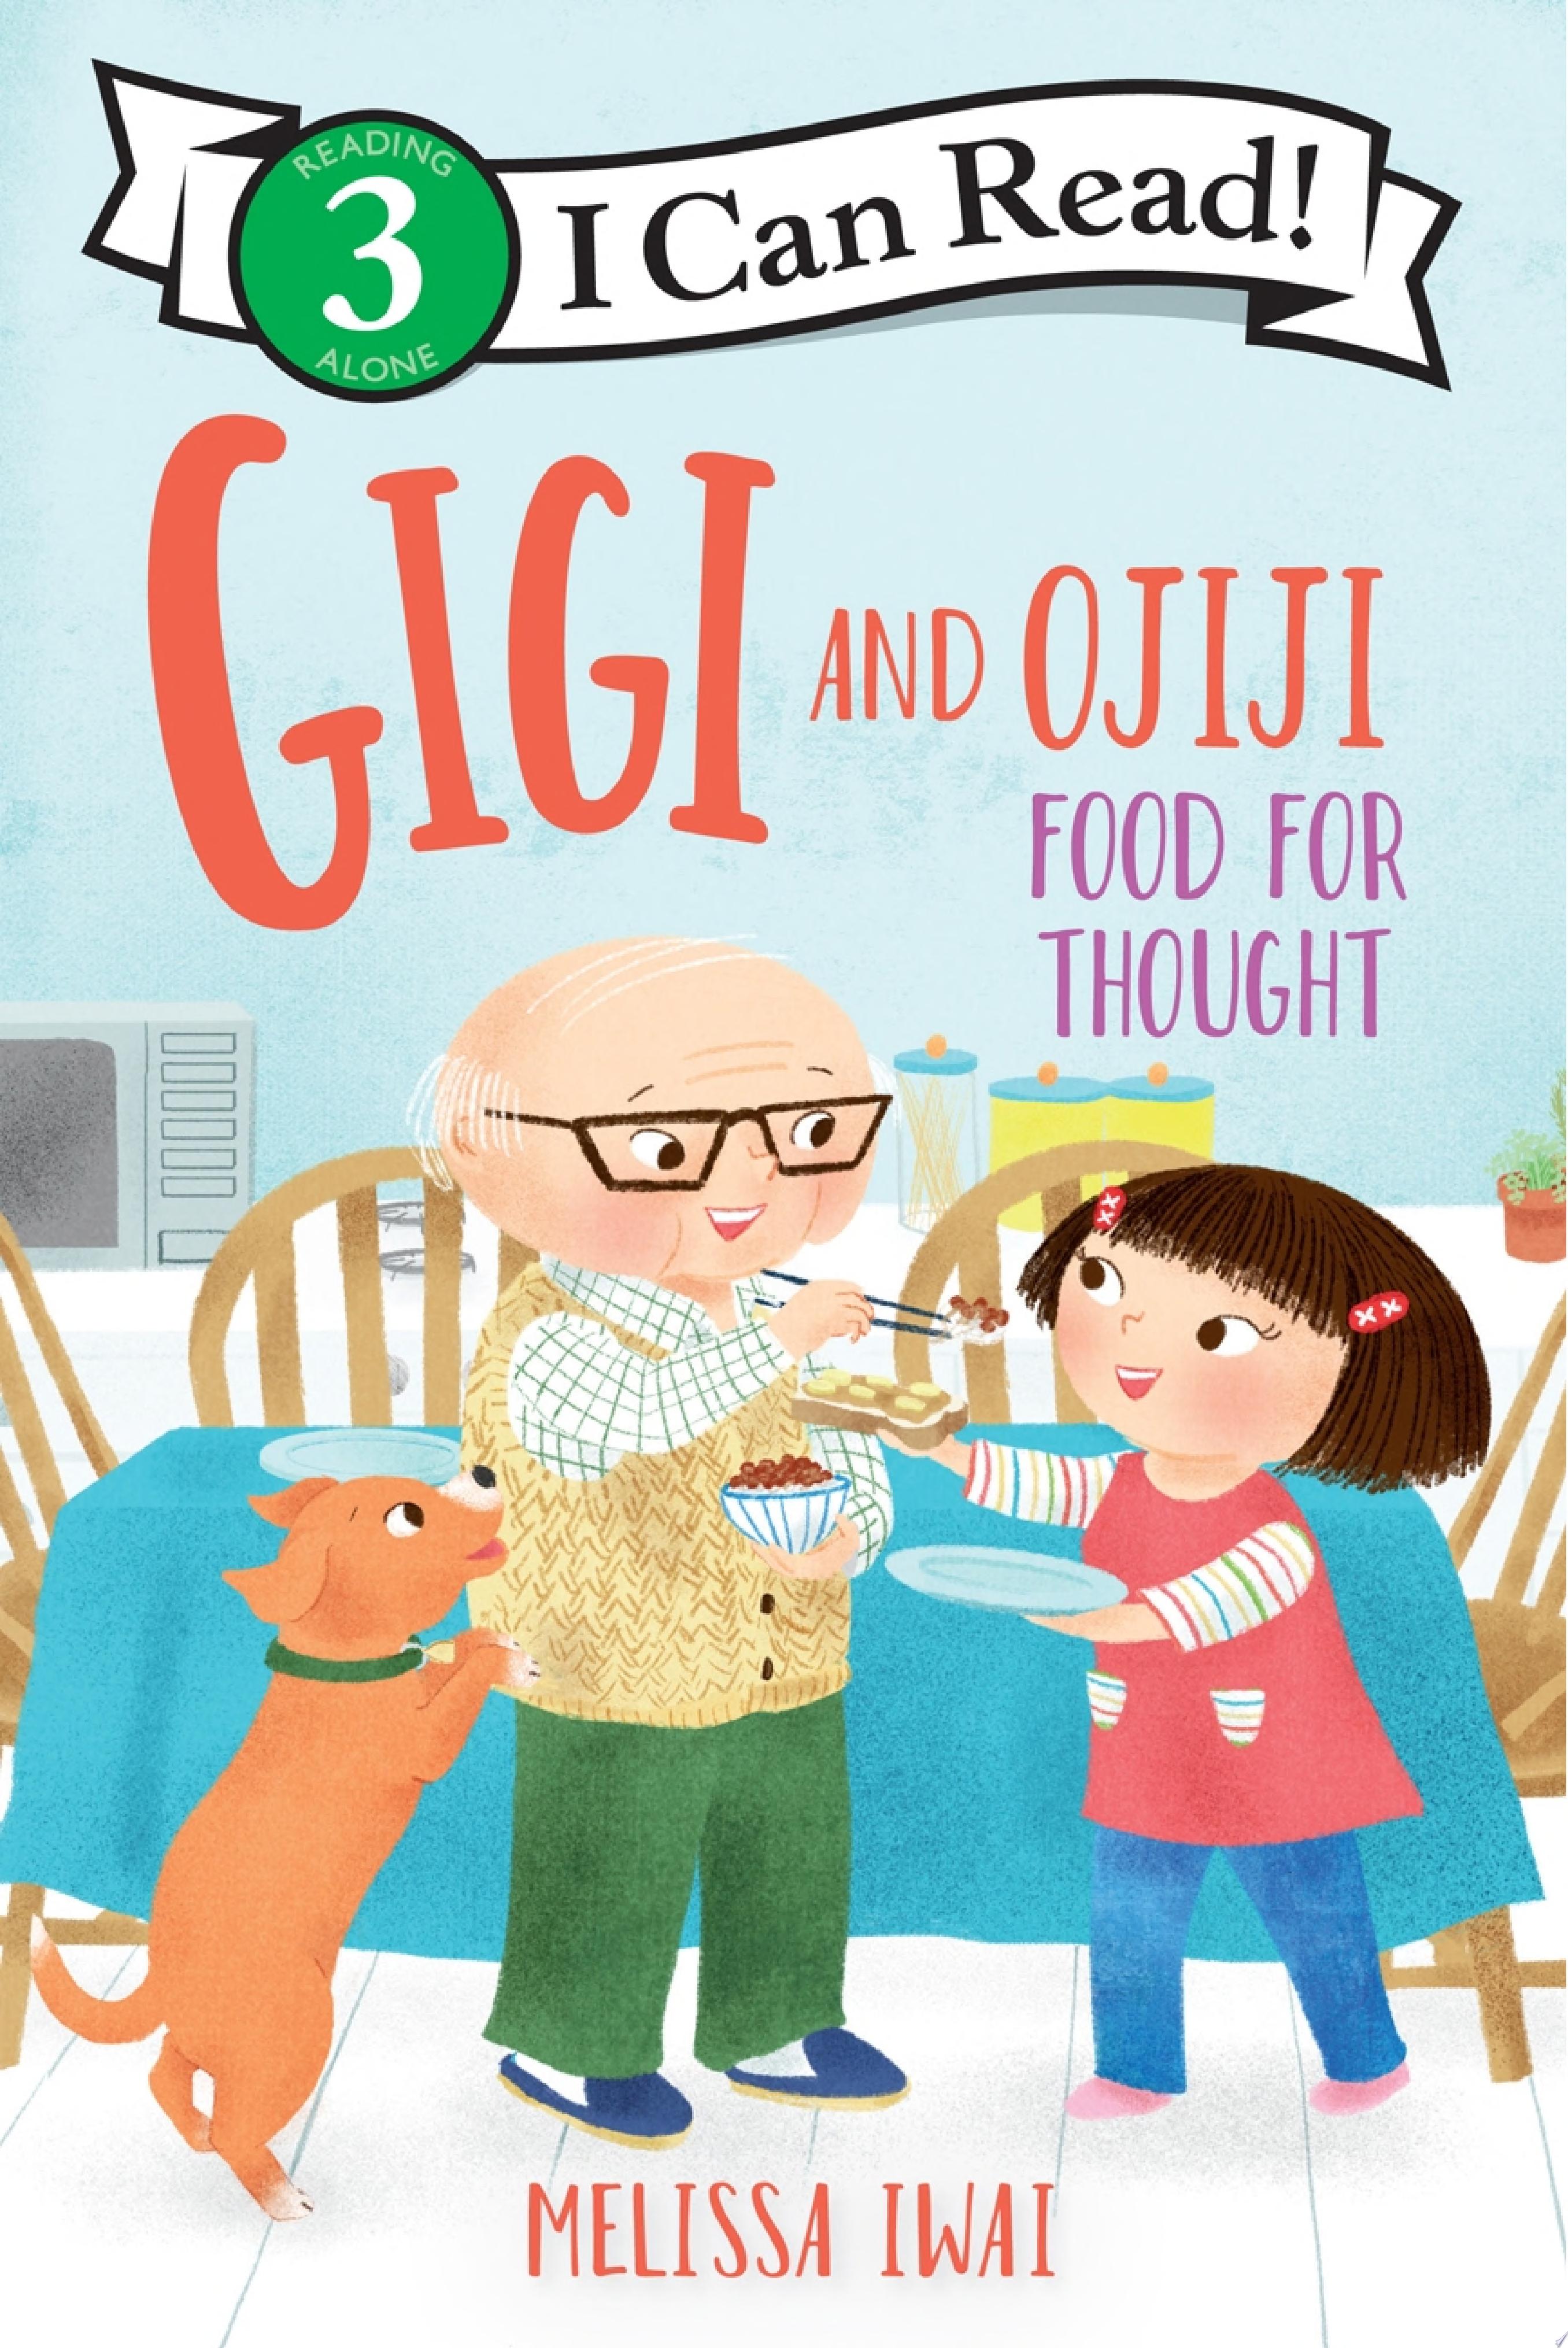 Image for "Gigi and Ojiji: Food for Thought"